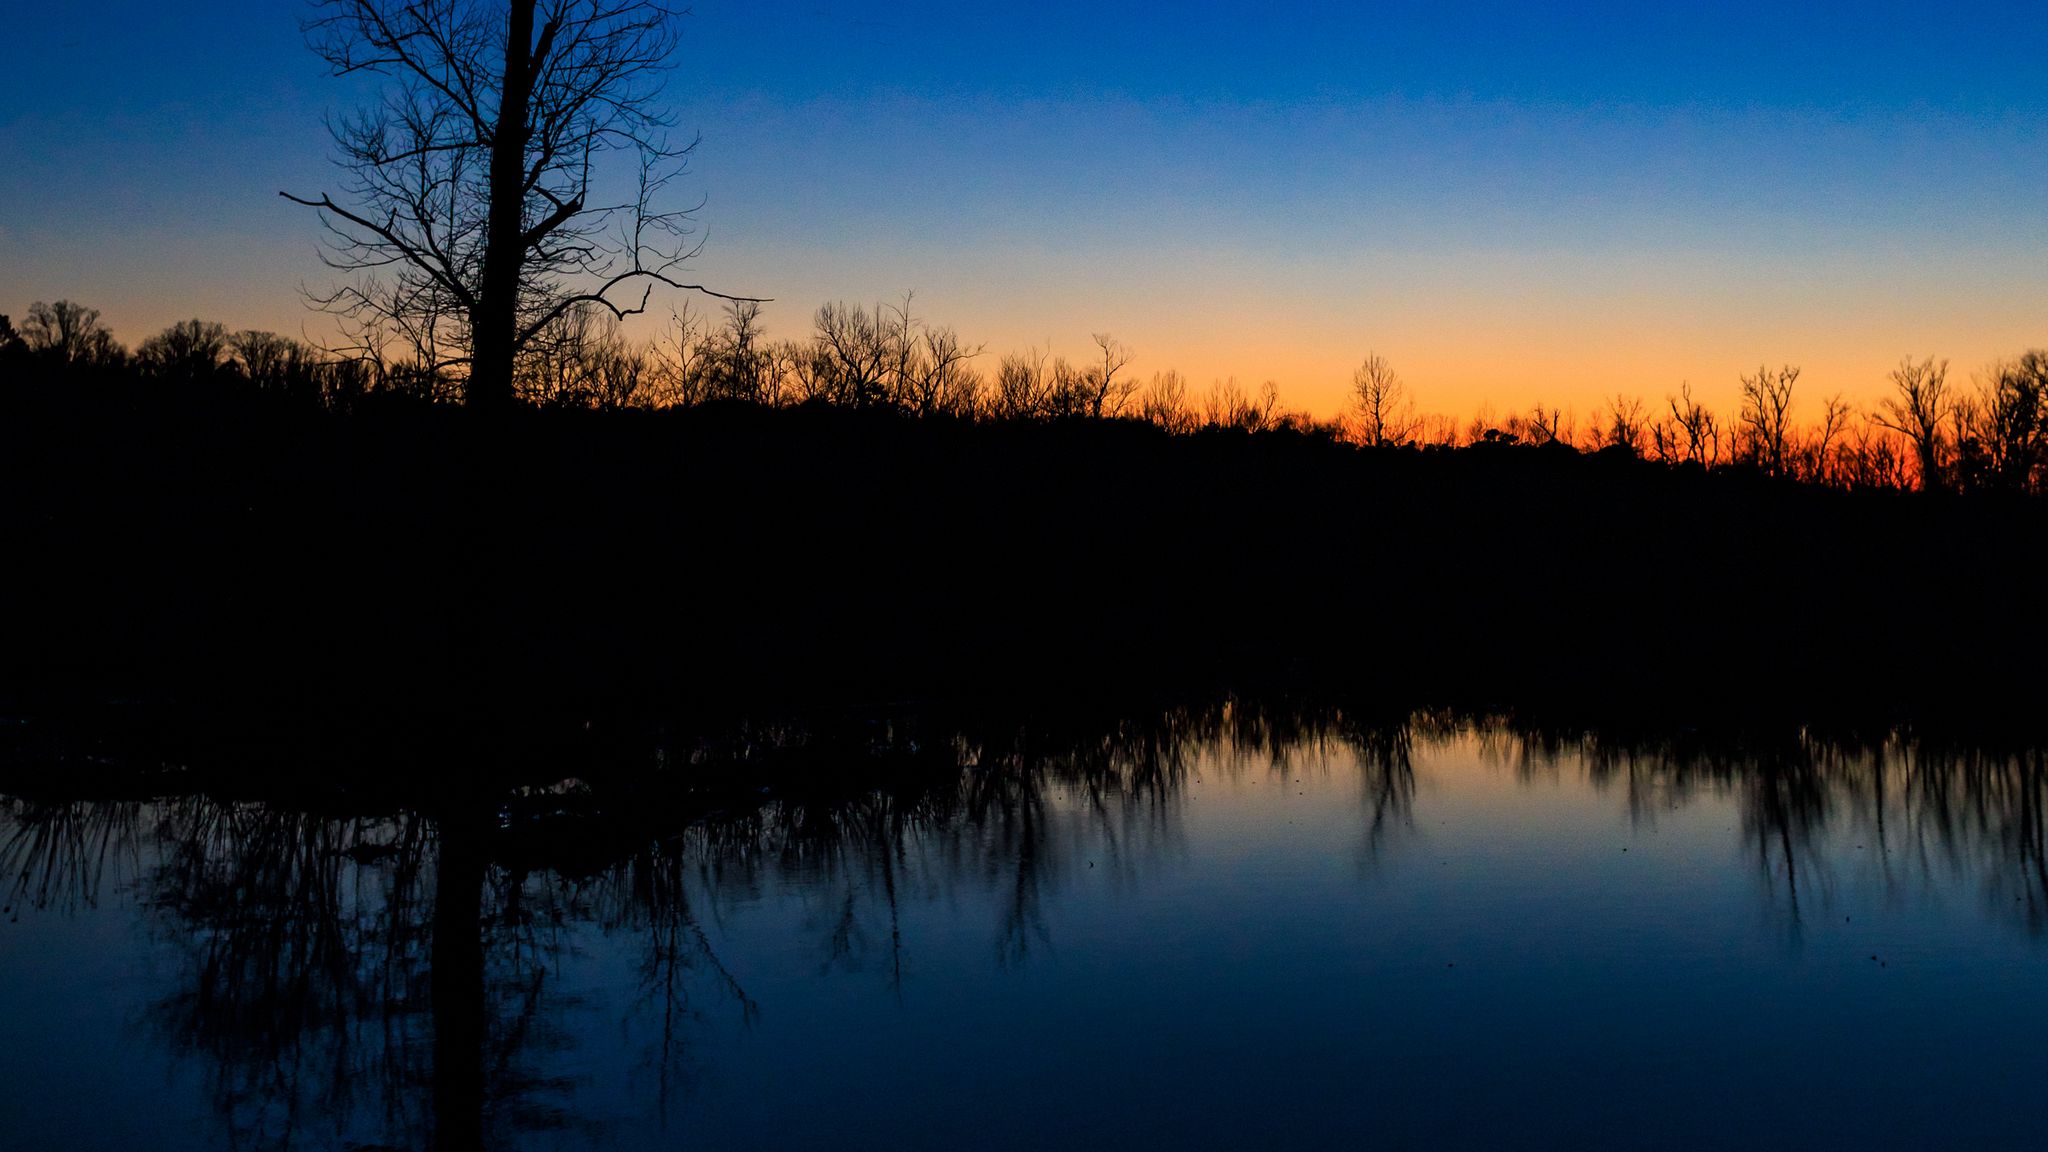 Download Wallpaper 2048x1152 Tree River Reflection Evening Ultrawide